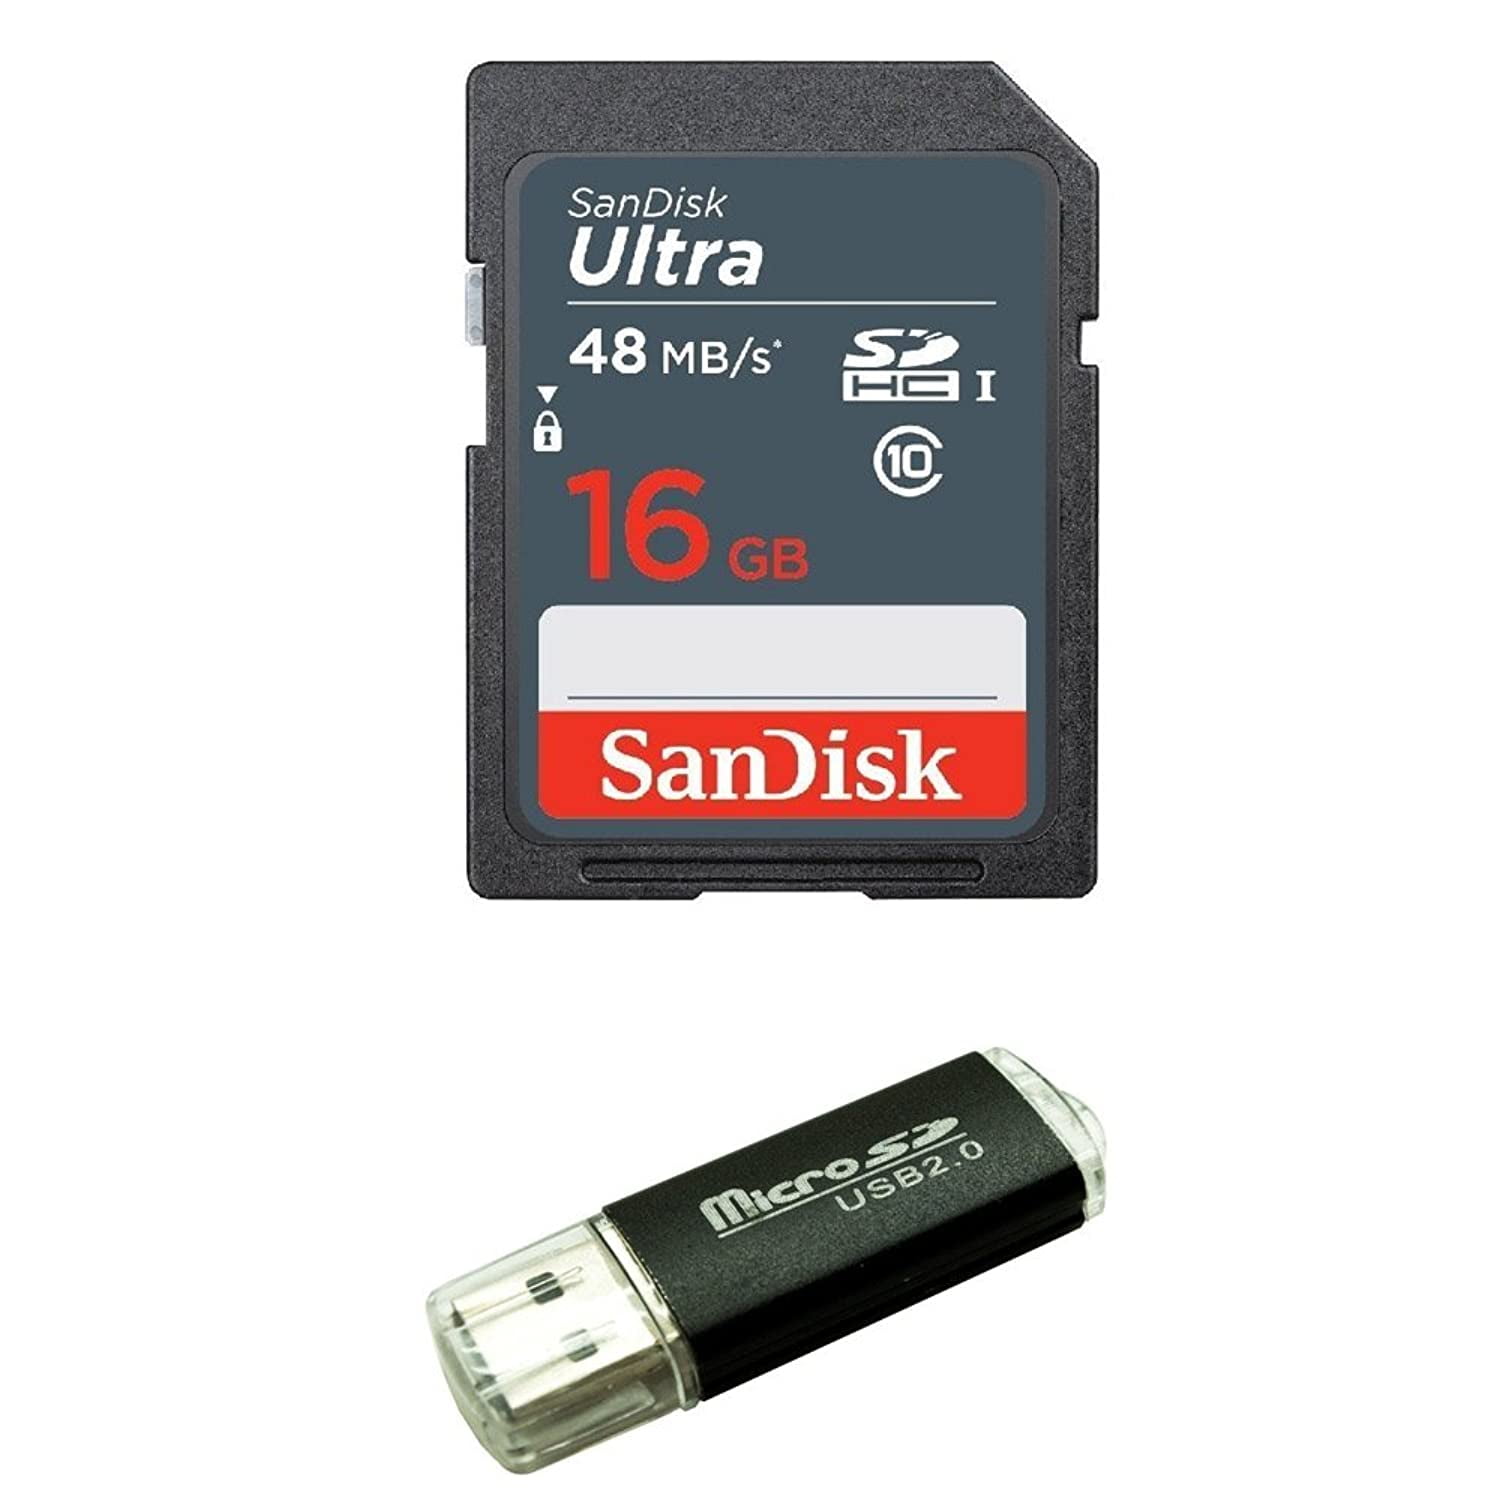 Sandisk 16GB SD SDHC Flash Memory Card works with NINTENDO 3DS N3DS DS DSI & Wii Media Kit ...